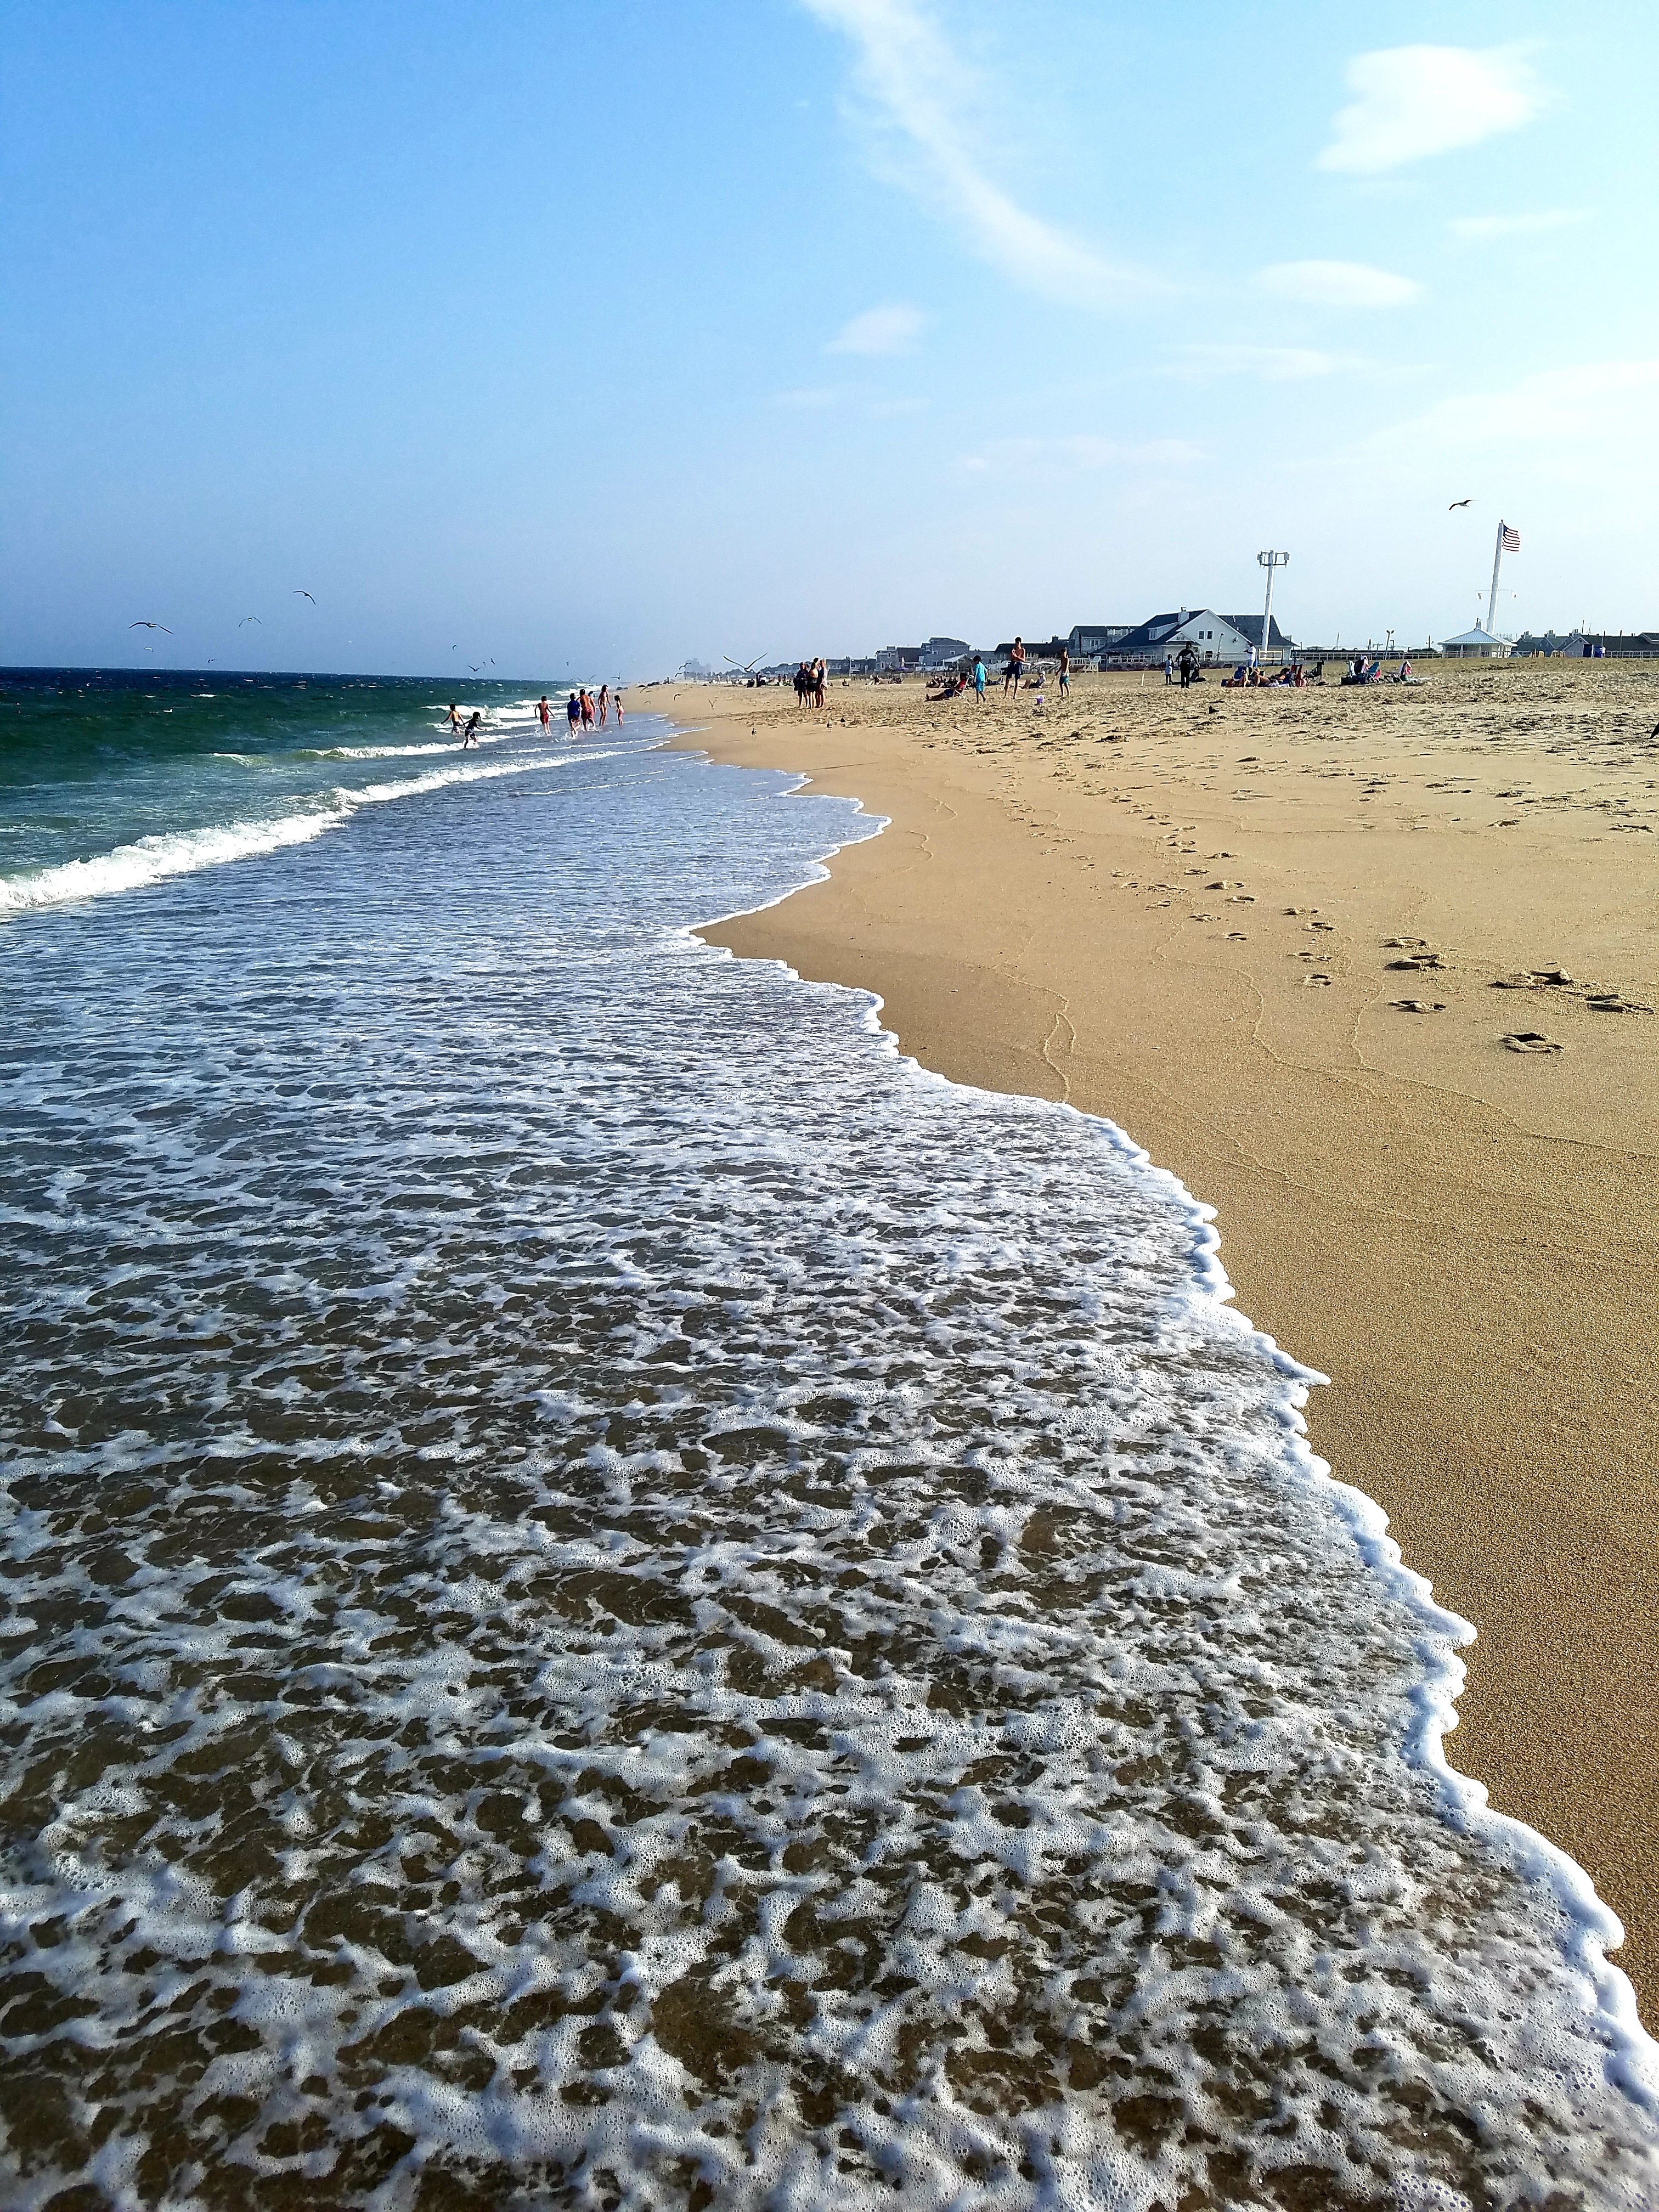 Daycation Down the Shore: September Beach Day